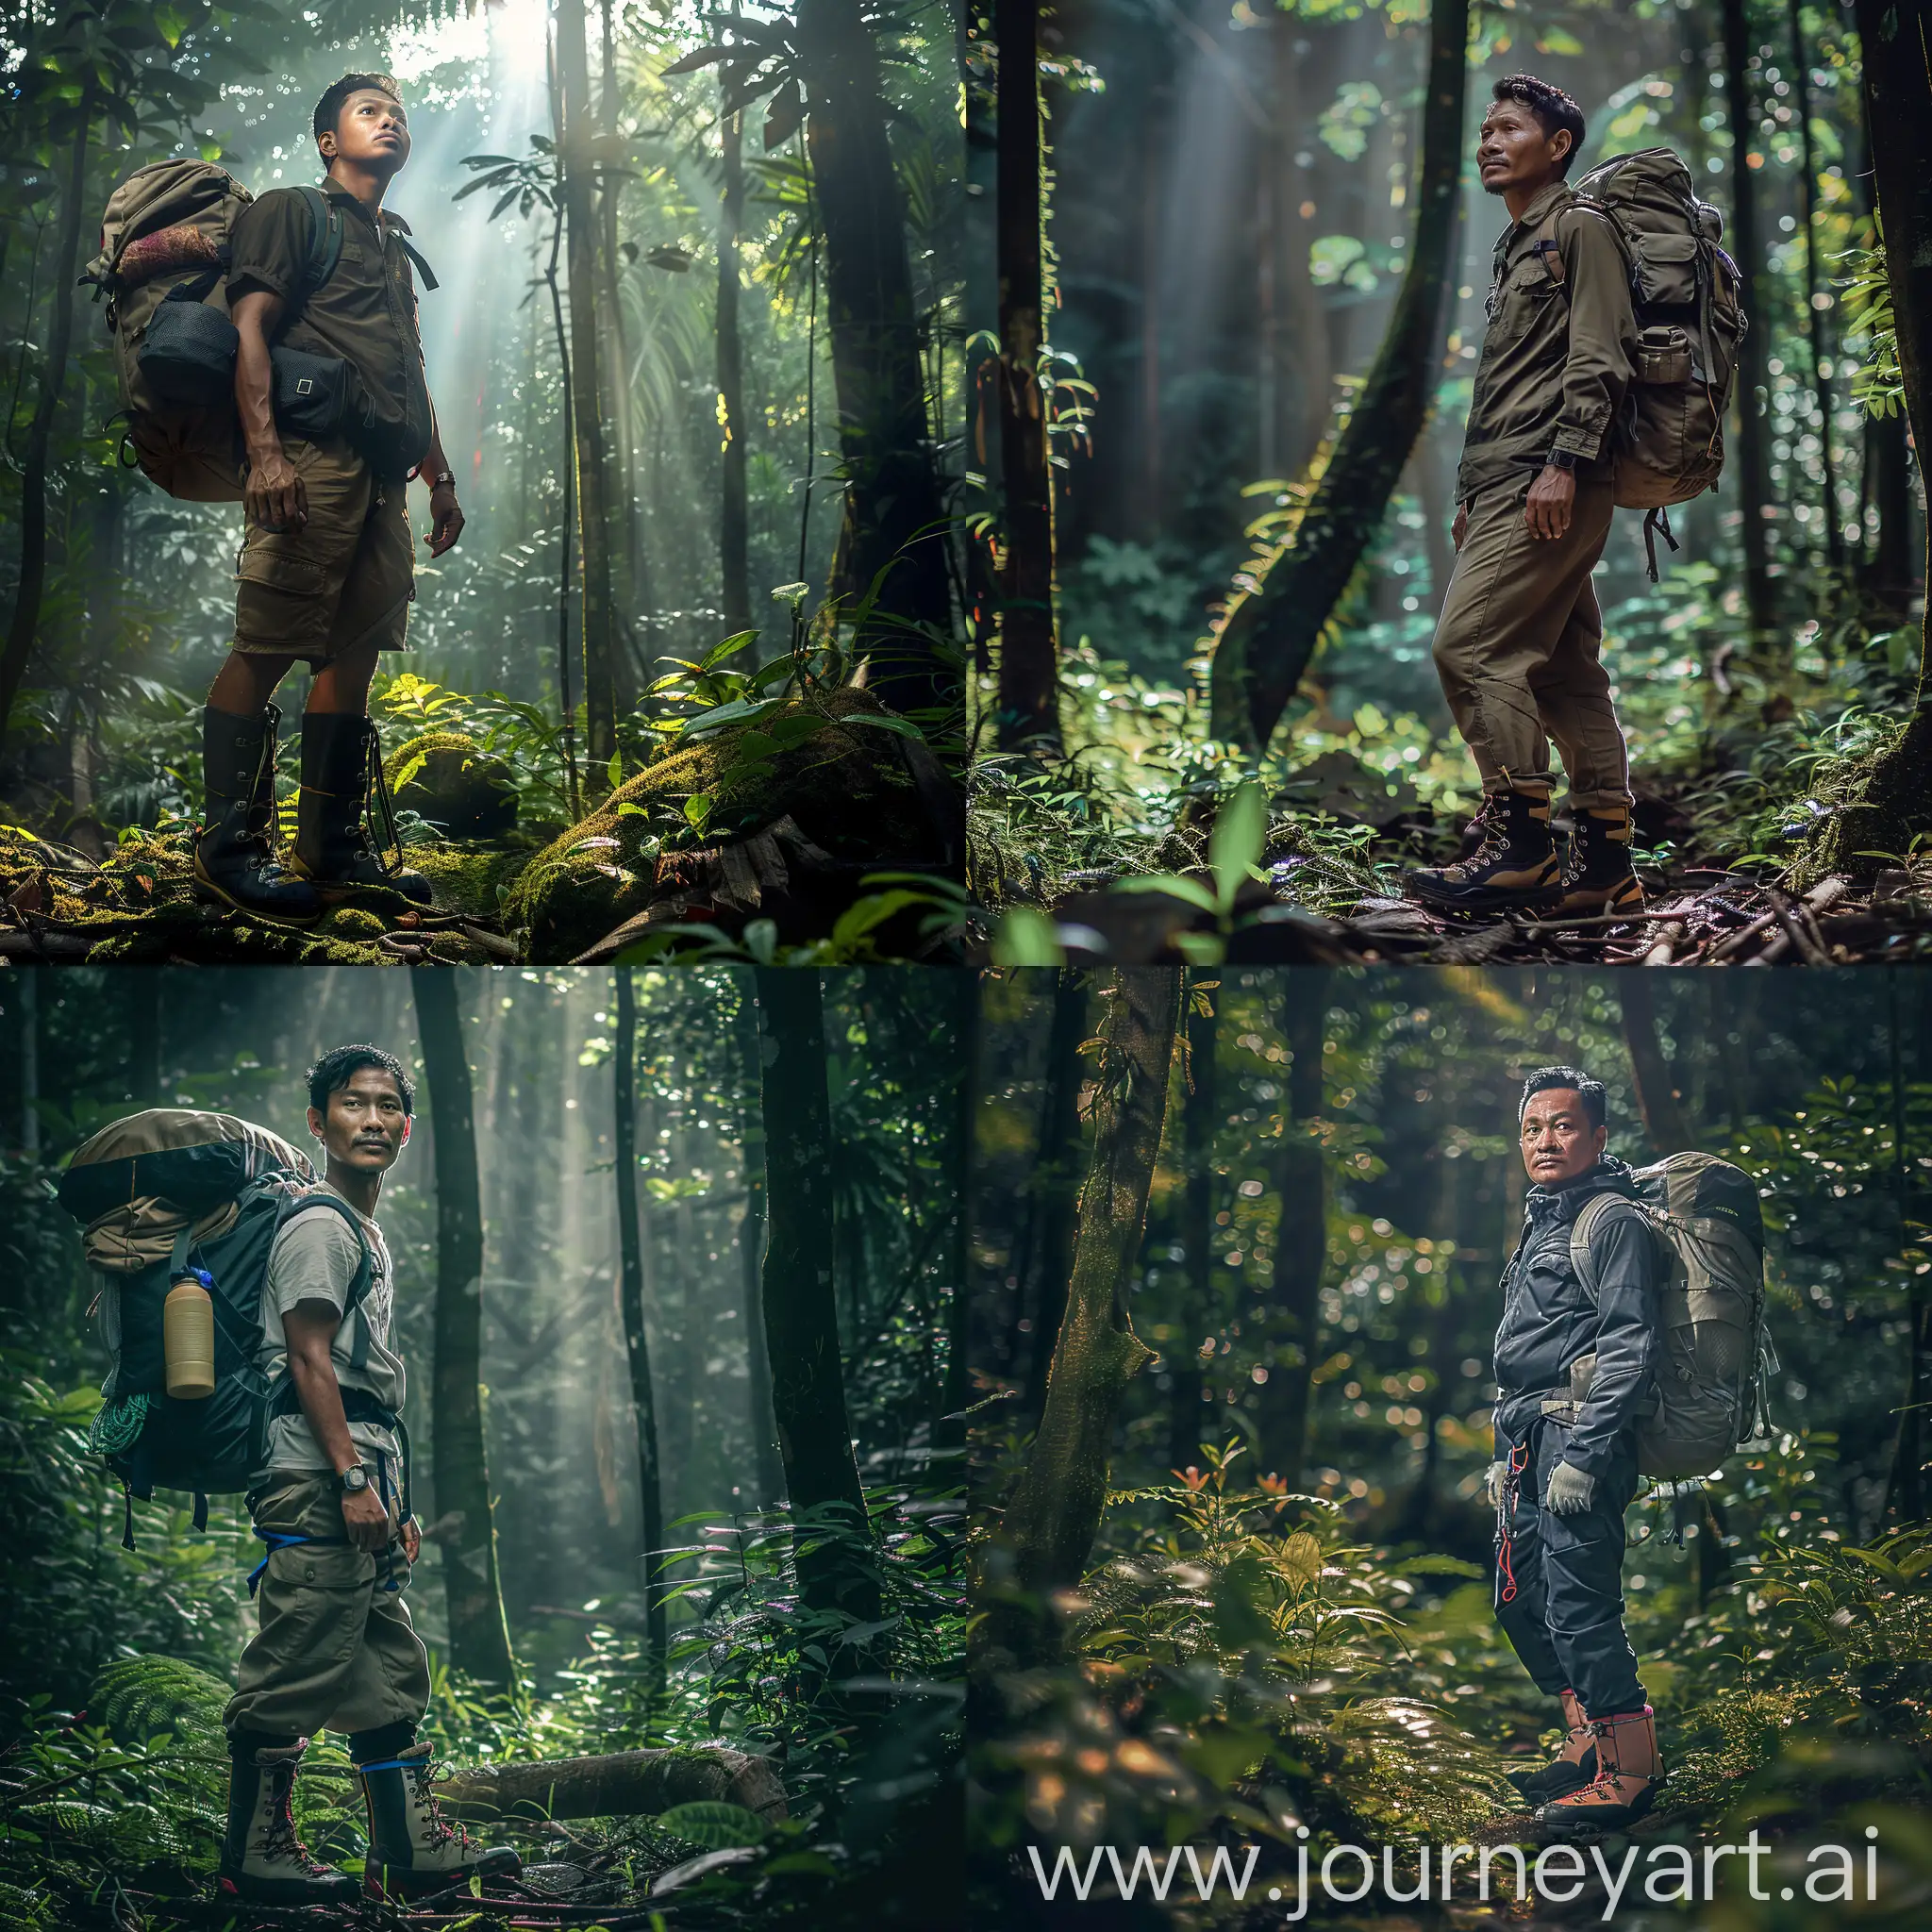 Indonesian-Climber-Portrait-in-Lush-Forest-Setting